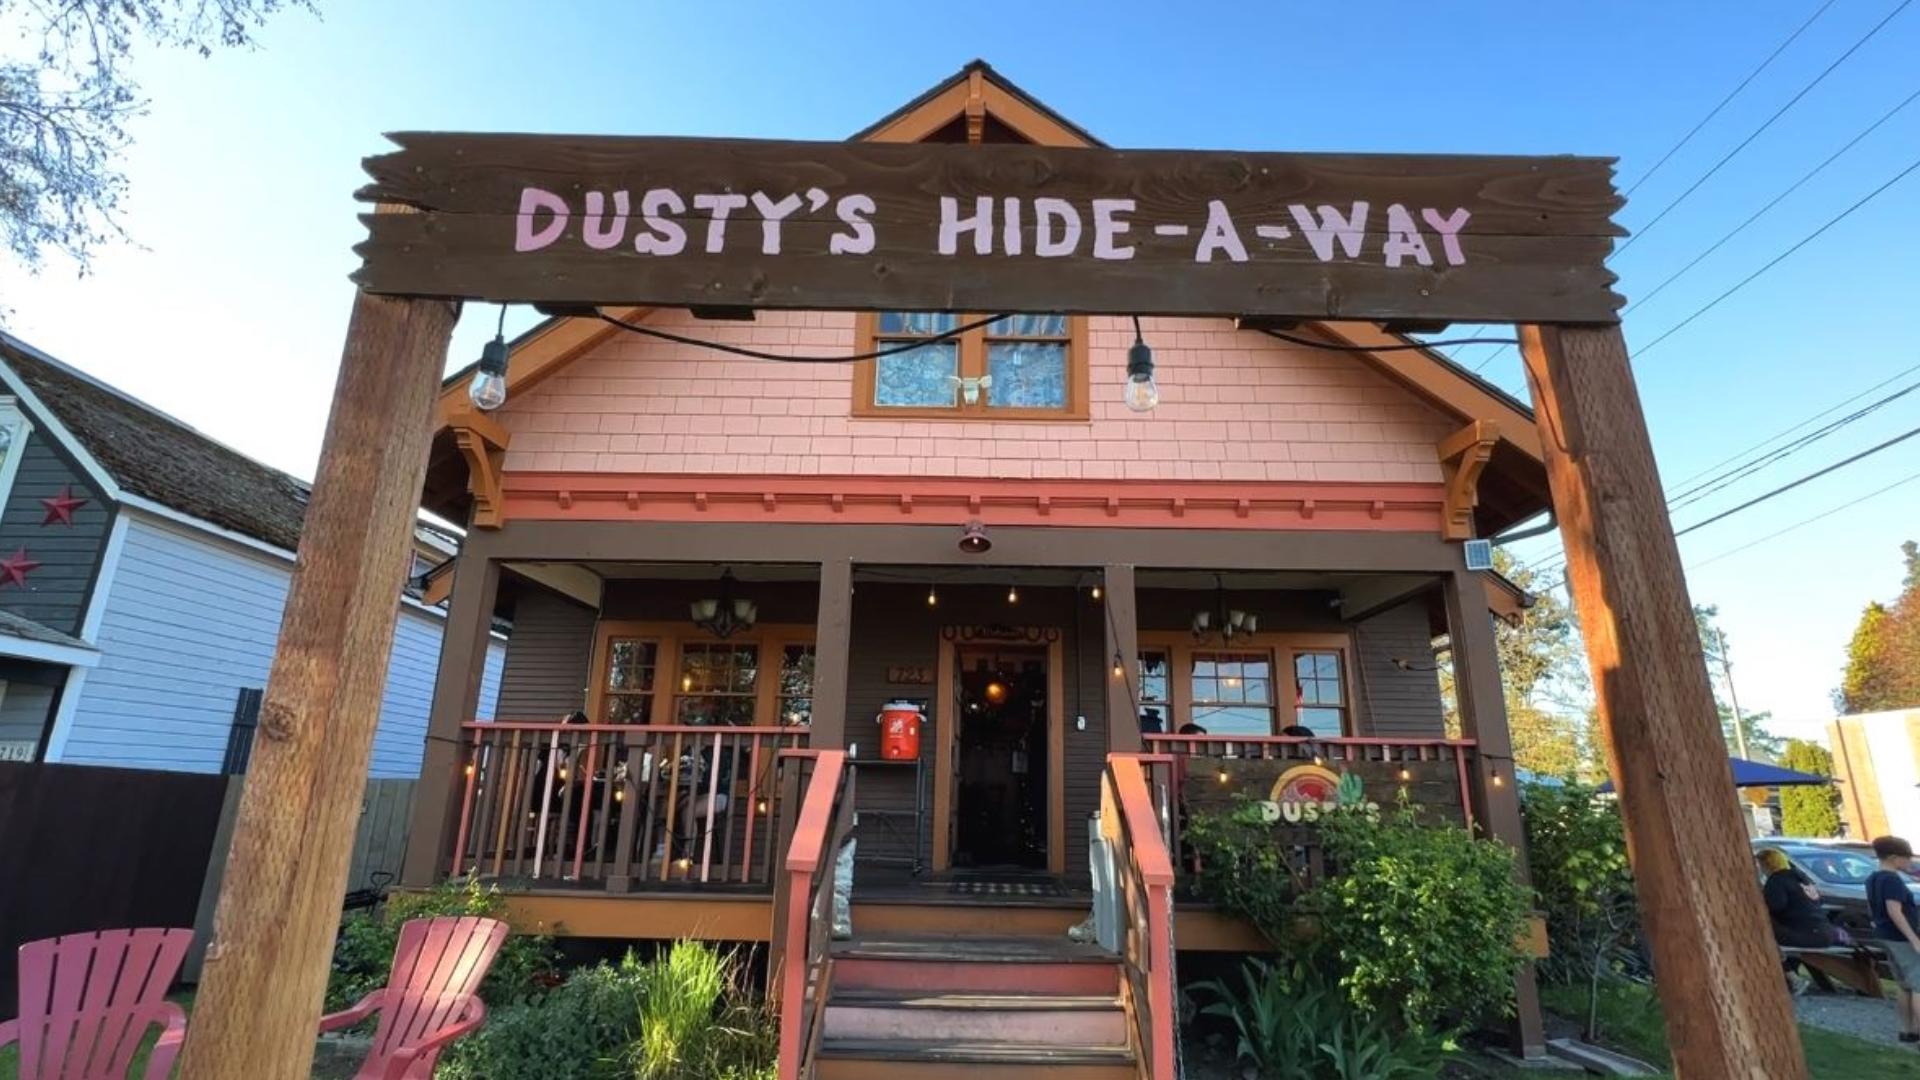 The owners wanted a place where kids could run around, dogs were welcome and the vibe was always friendly. With Dusty's Hideaway they delivered. #k5evening